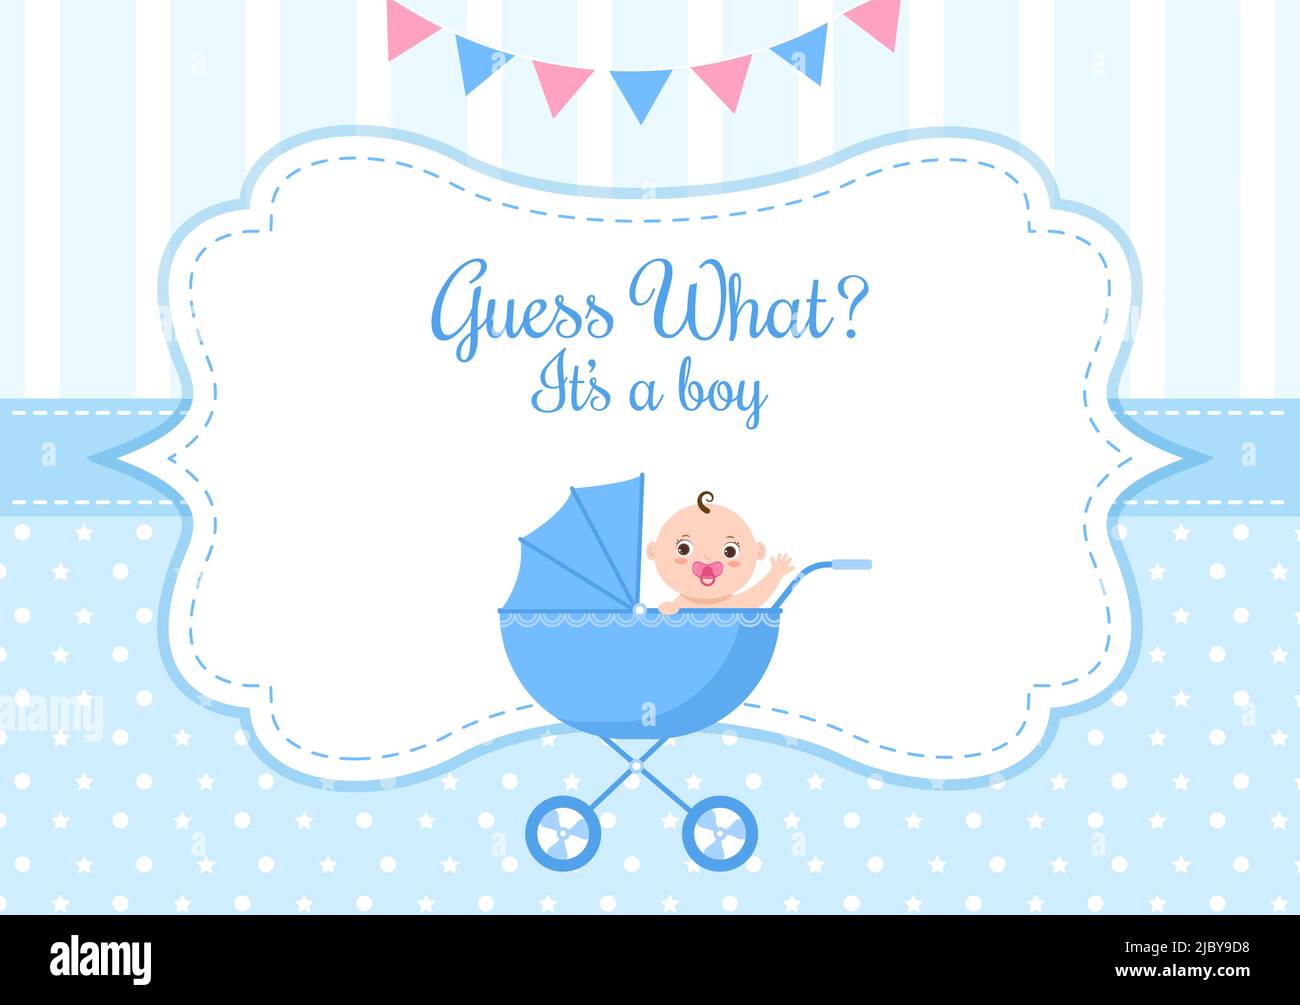 Birth Photo is it a Boy with a Baby Image and Blue Color Background Cartoon Illustration for Greeting Card or Signboard Stock Vector